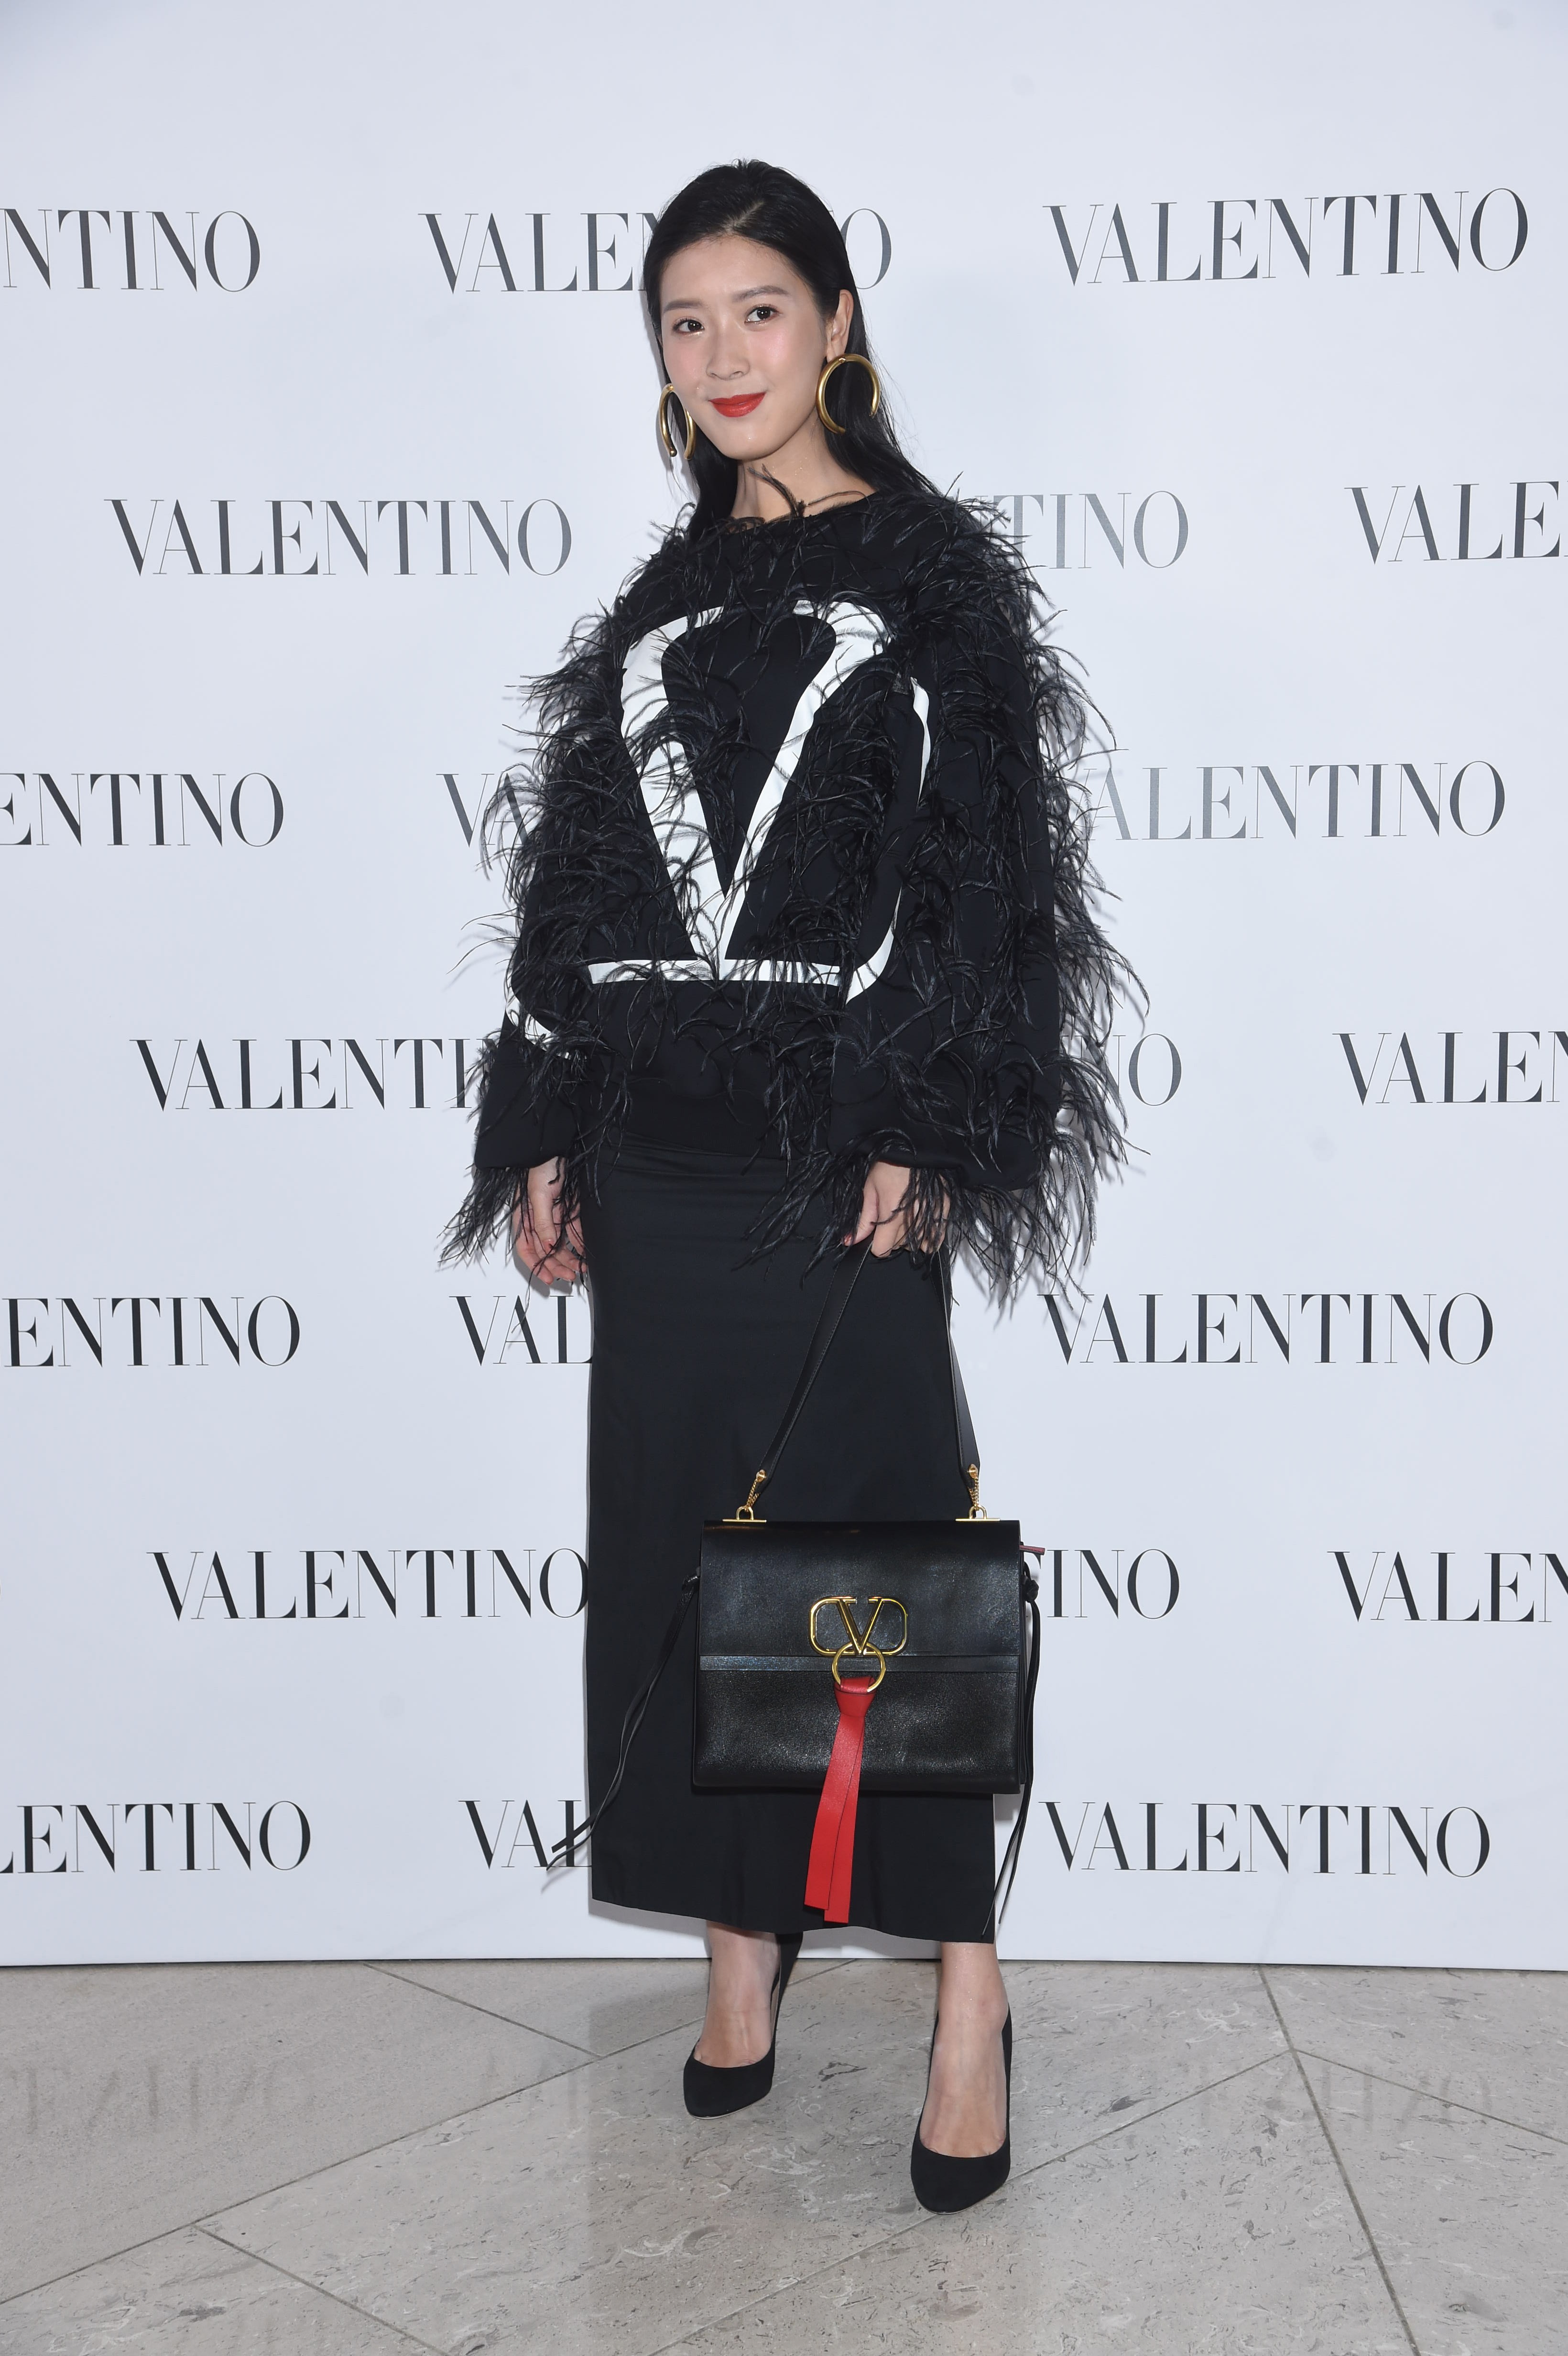 K-pop star Ong Seong-wu jets in for Valentino's VRING bag launch